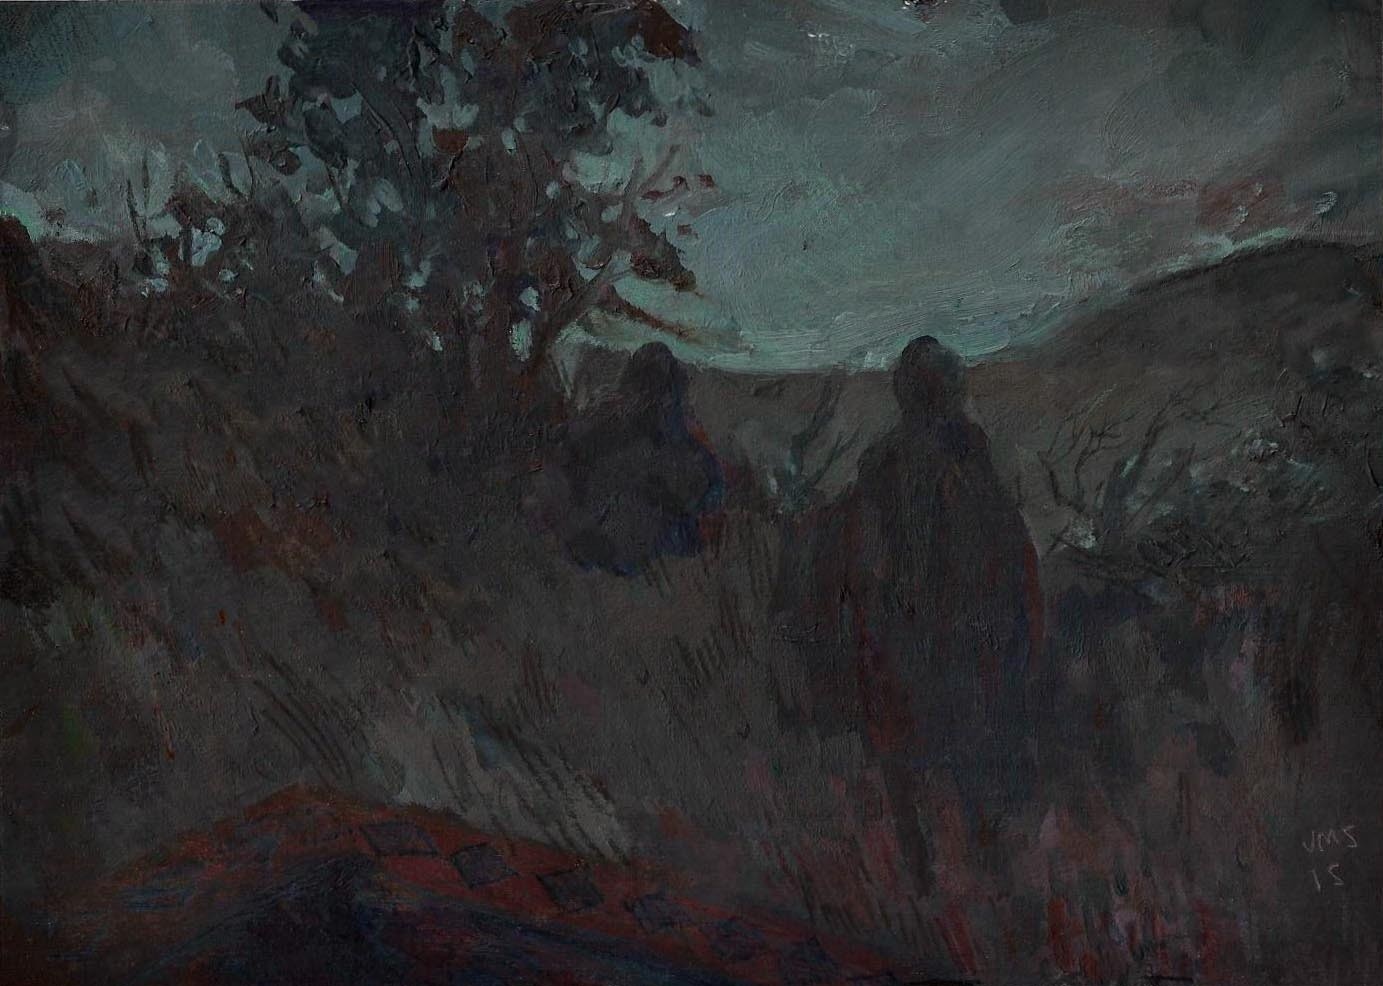 Two shadowy figures standing in a landscape, all dark and stormy.